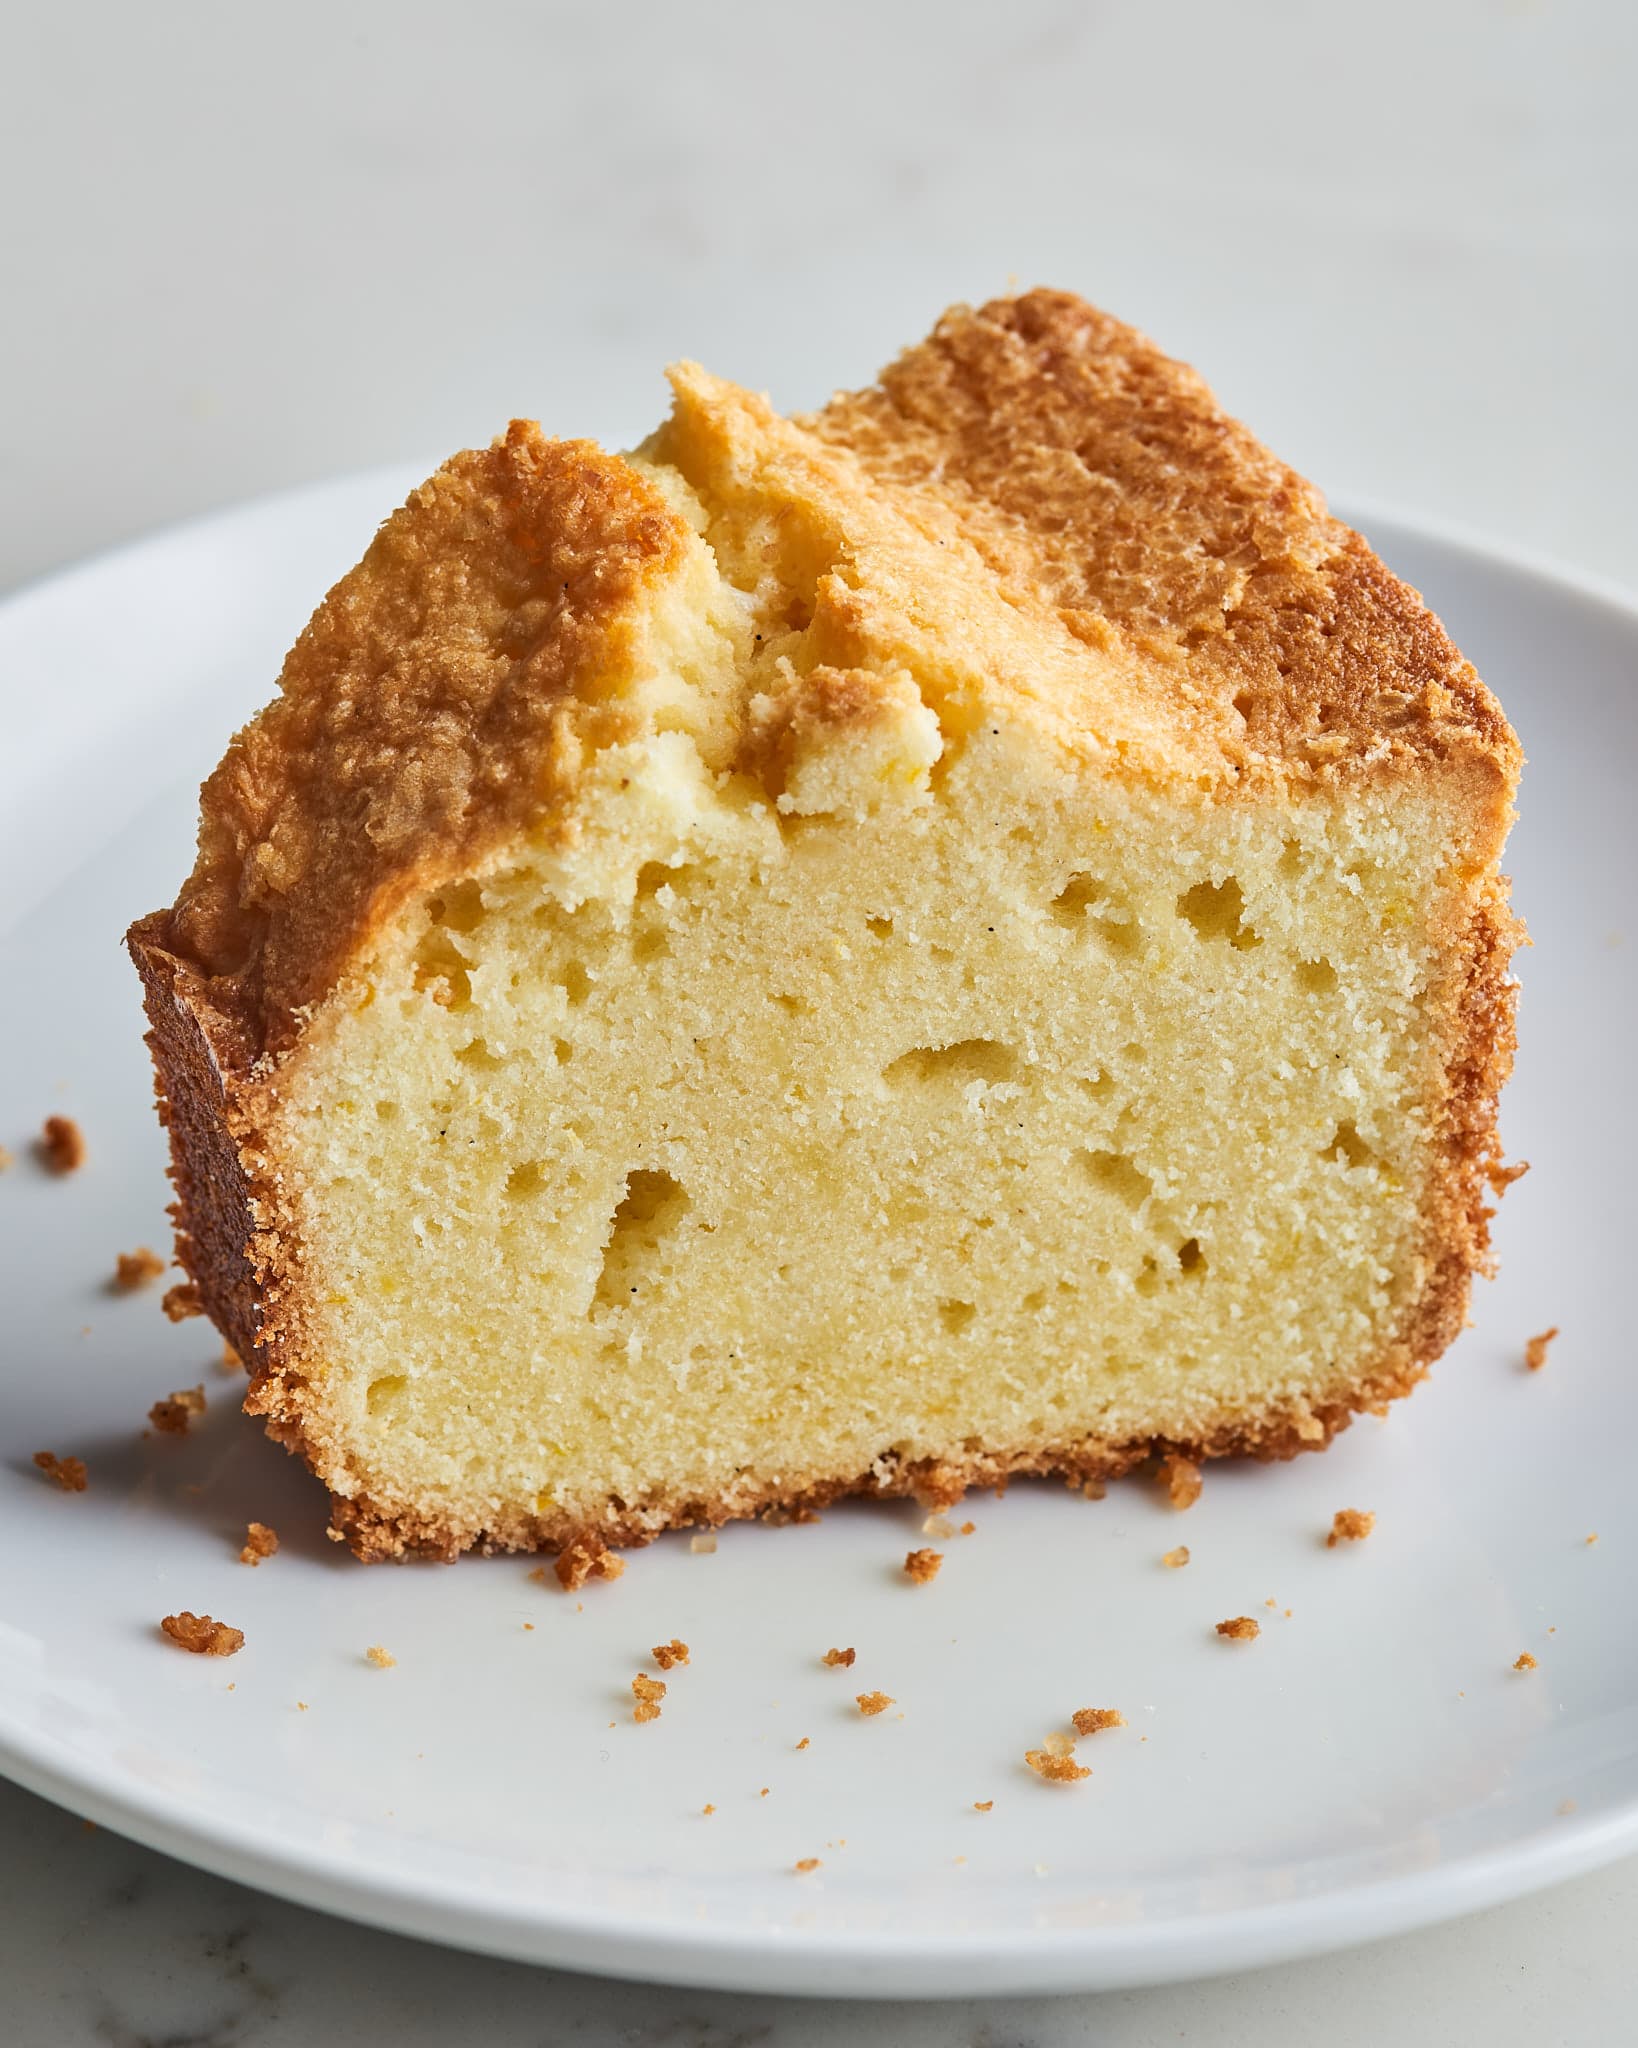 I Tried 4 Famous Pound Cake Recipes - Here's the Best